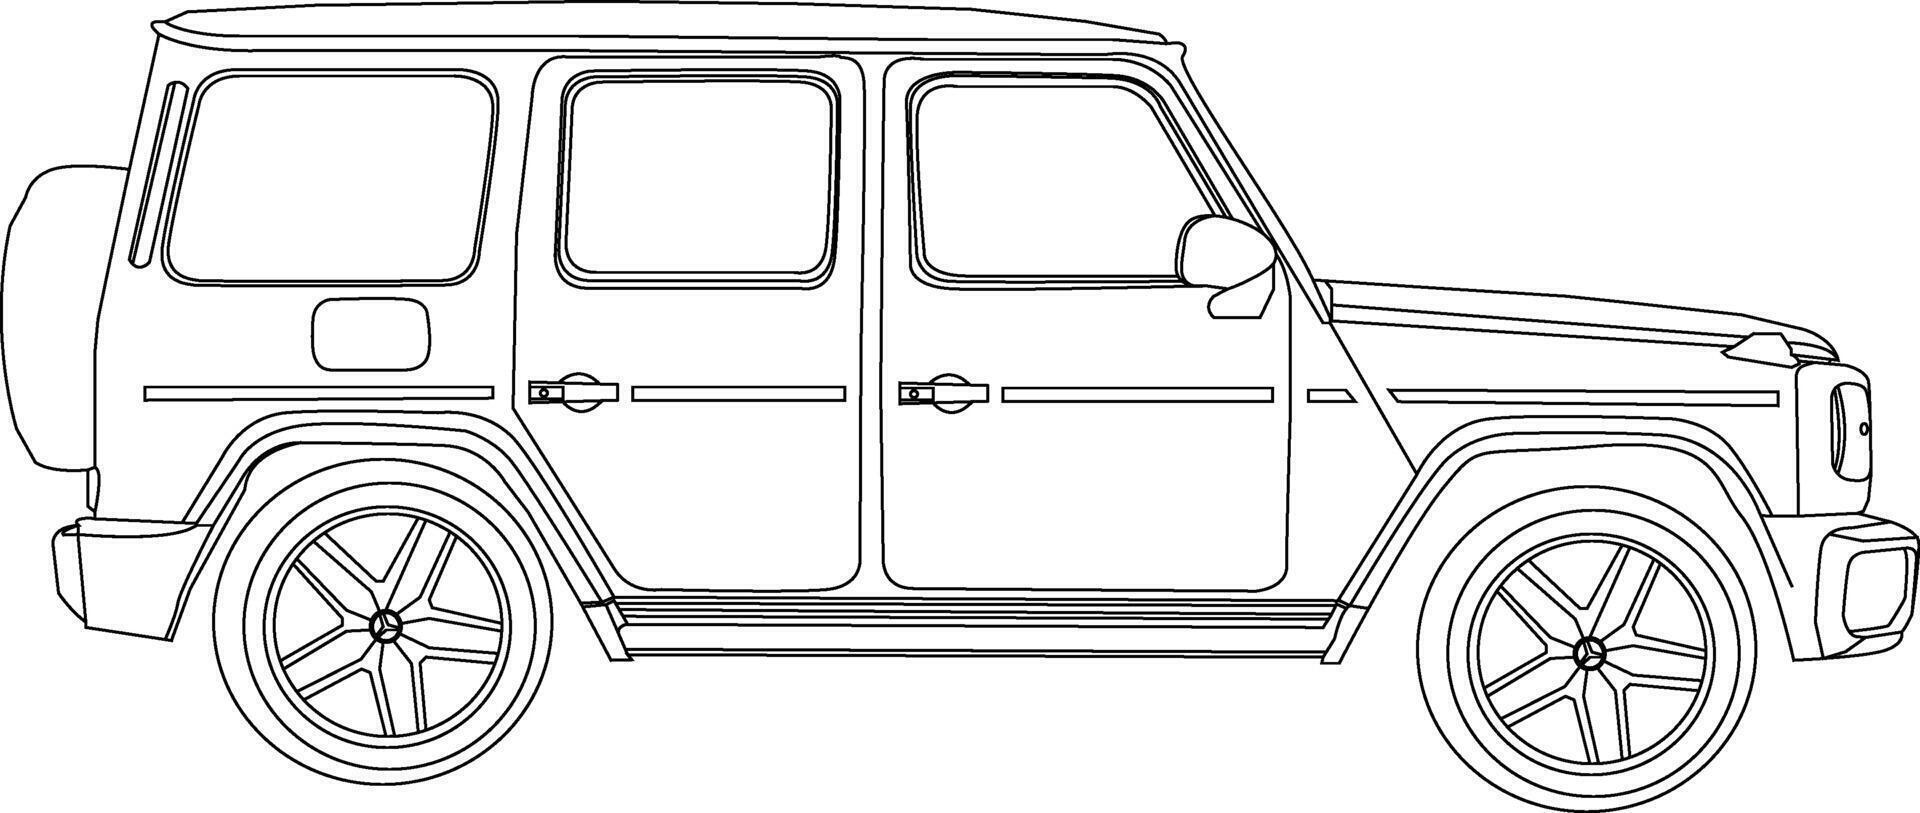 One line drawing car and outline on the white background vector